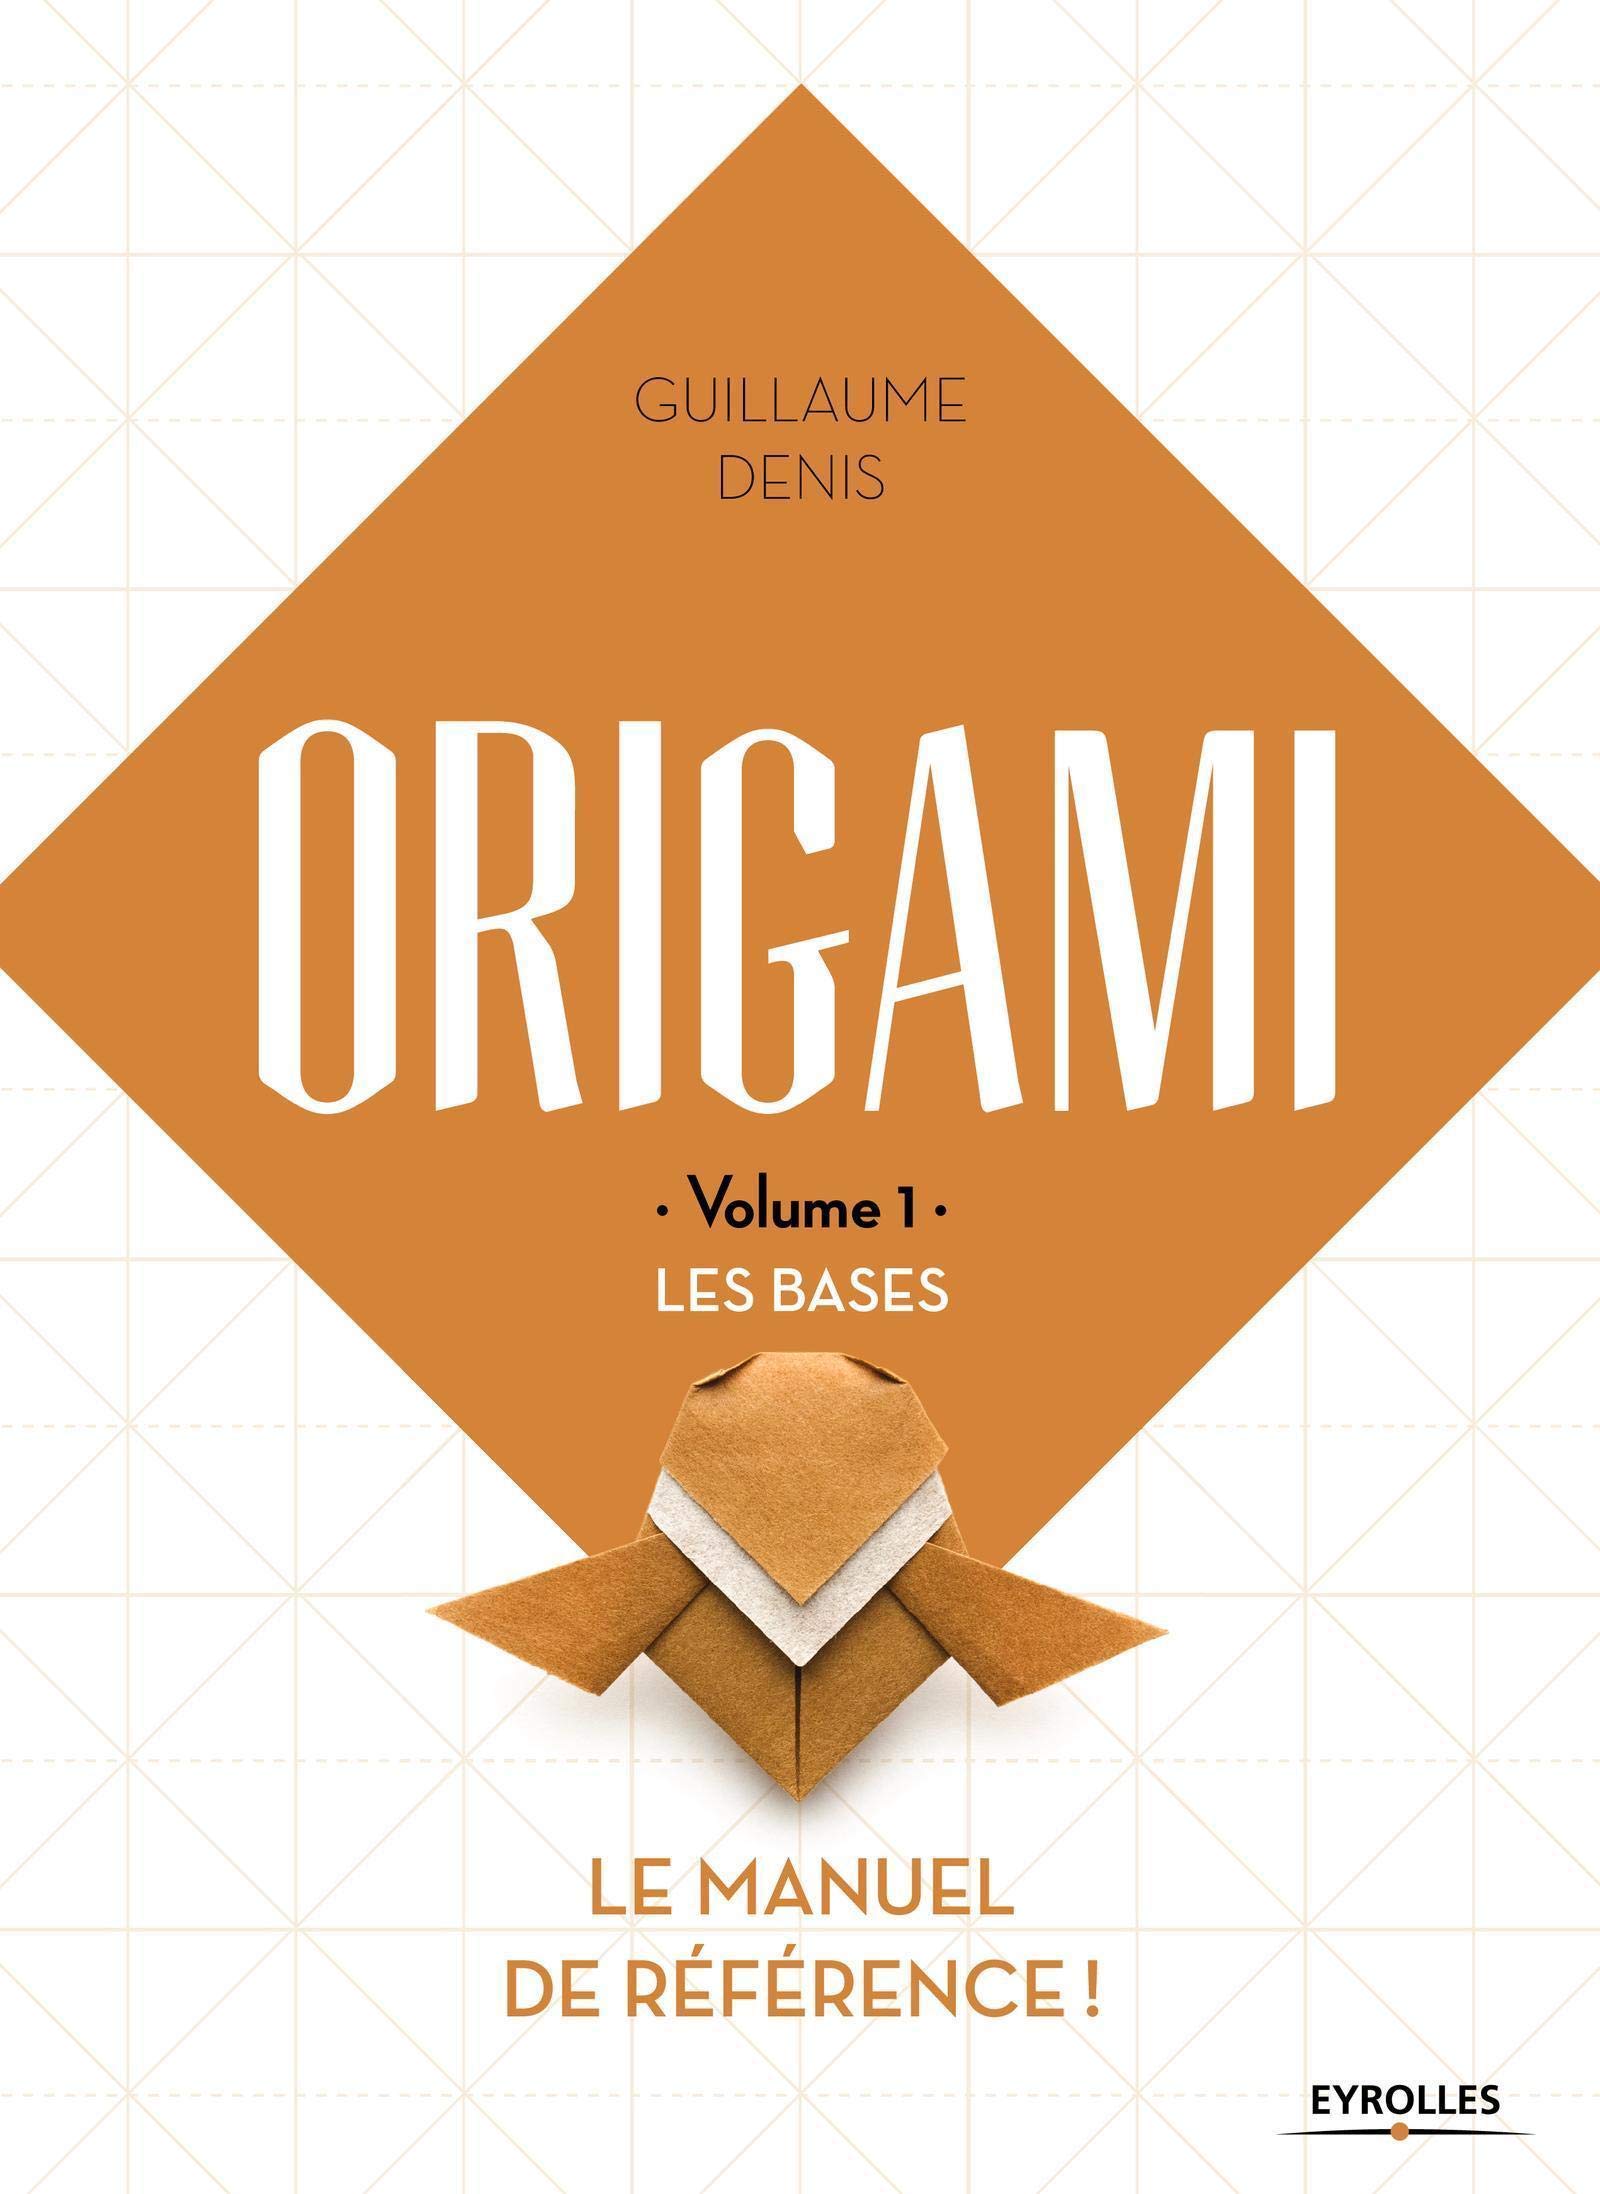 ORIGAMI - Volume 1 - LES BASES : page 176.